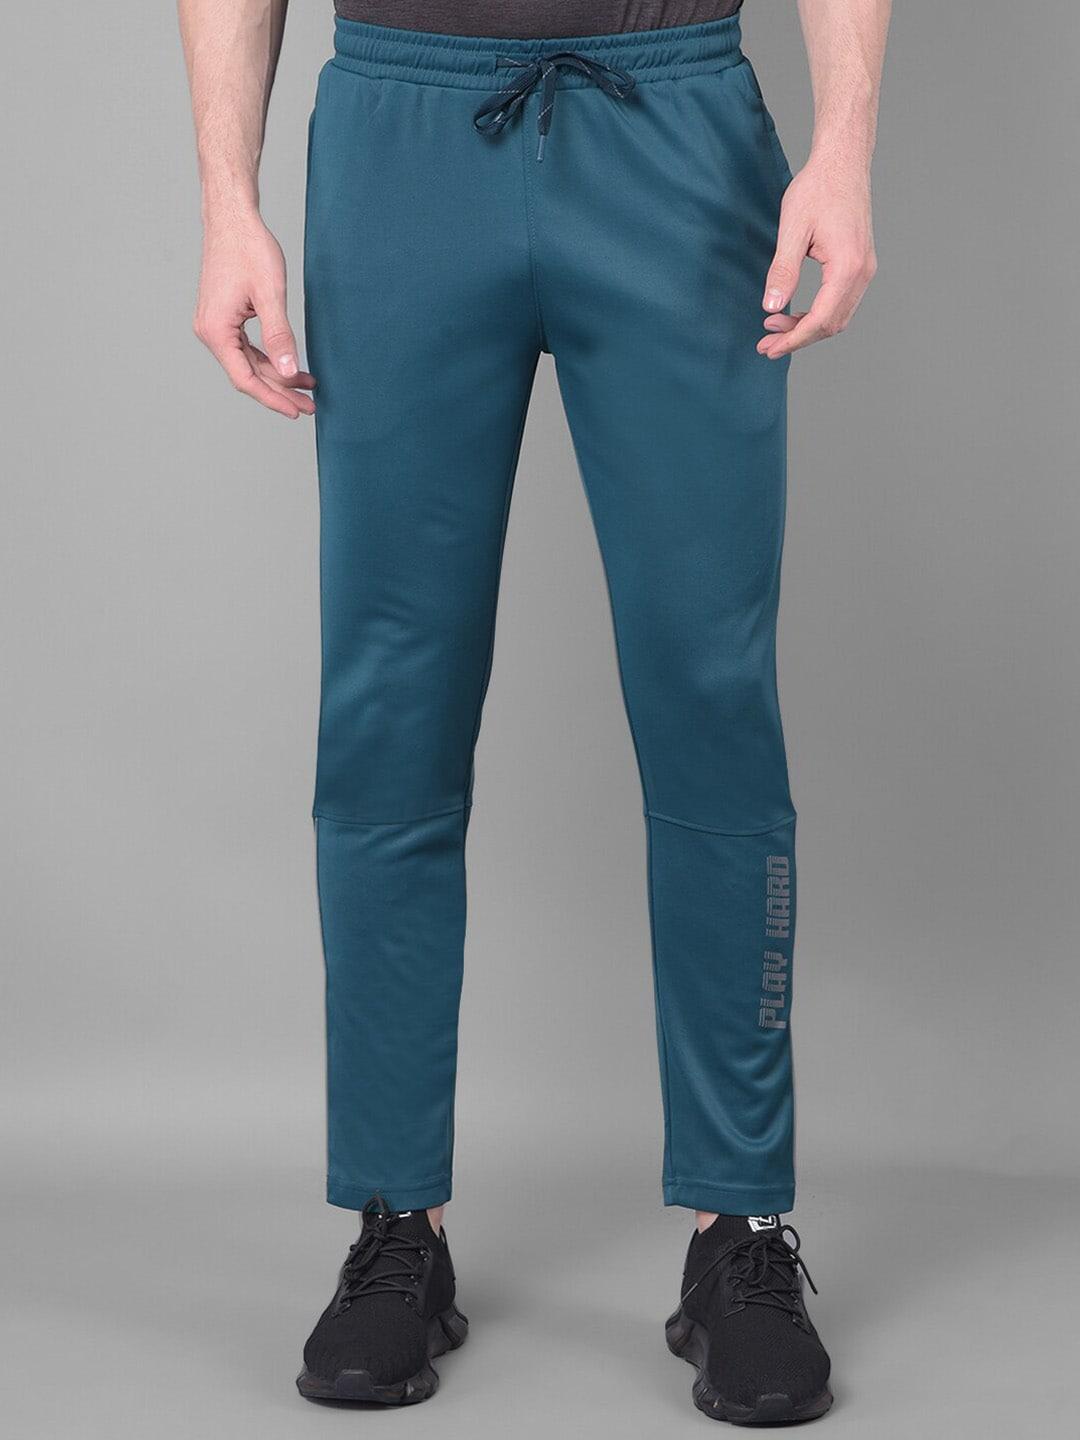 force-nxt-men-mid-rise-anti-odour-sports-track-pant